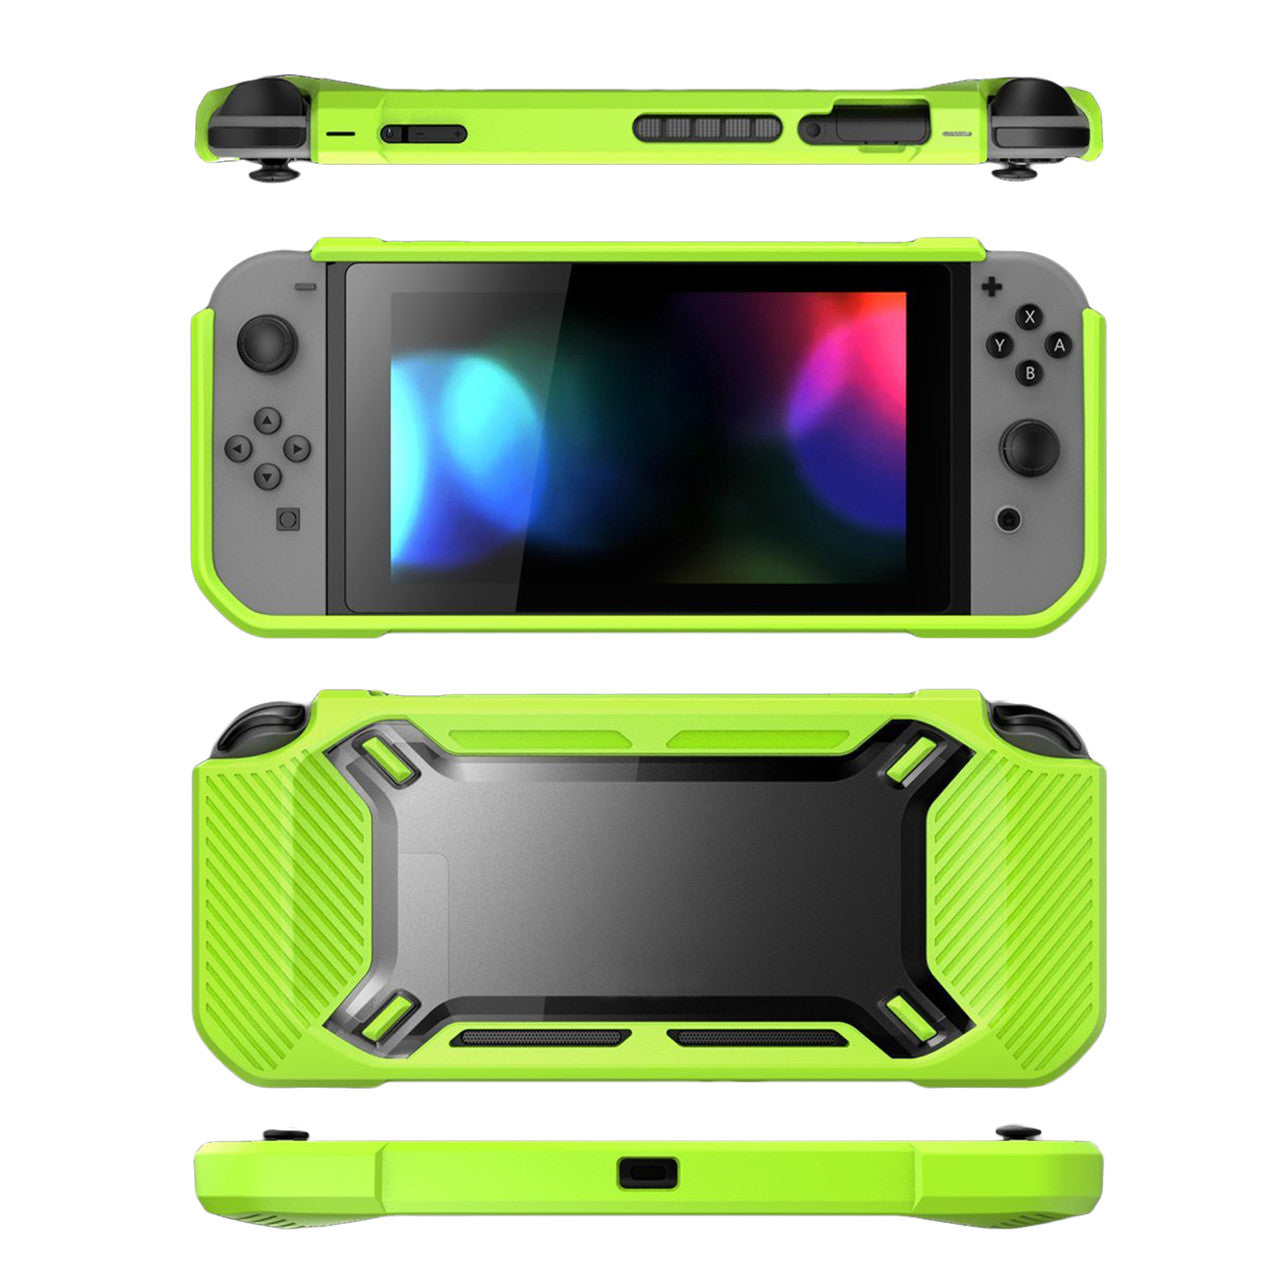 Hard Rugged Series Slim Protective Skin Shell Hard Case Cover for Nintendo Switch, Green